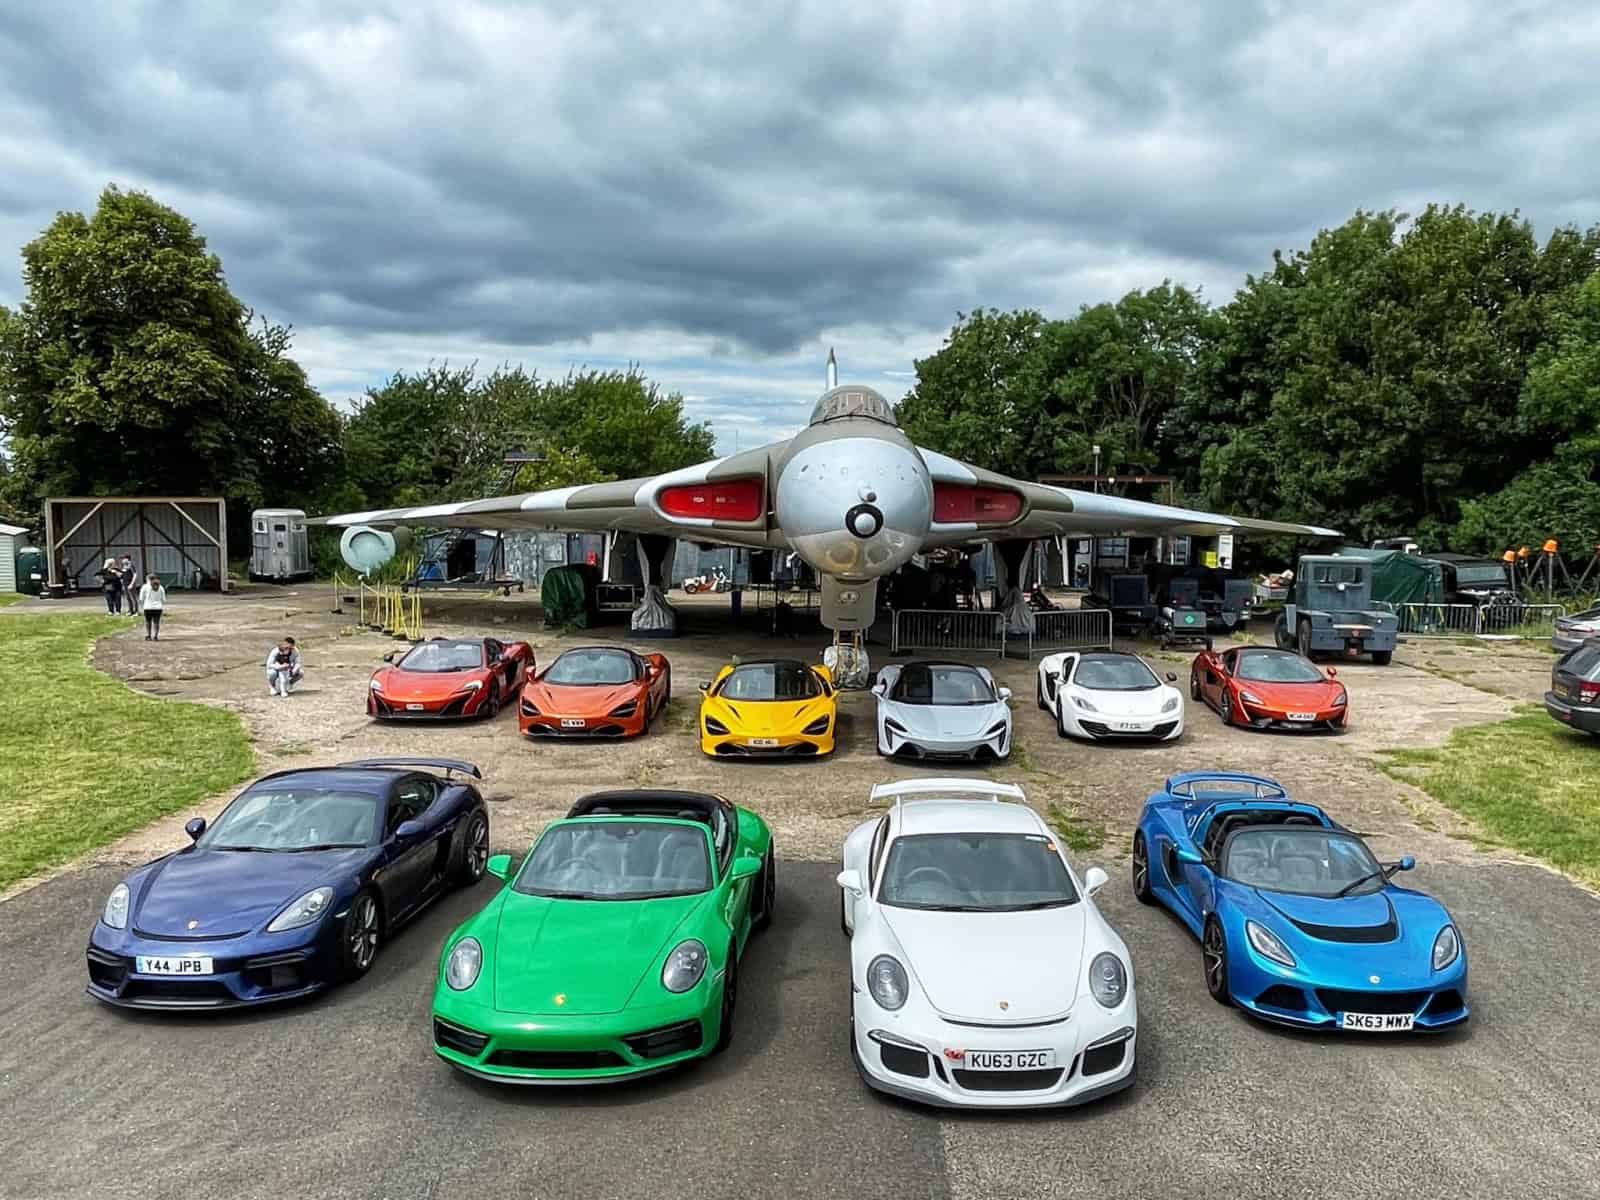 A mixture of Supercars and McLaren Supercars parked on the runway underneath a Vulcan Bomber Airplane as part of the WWOW Vulcan Bomber Day drive